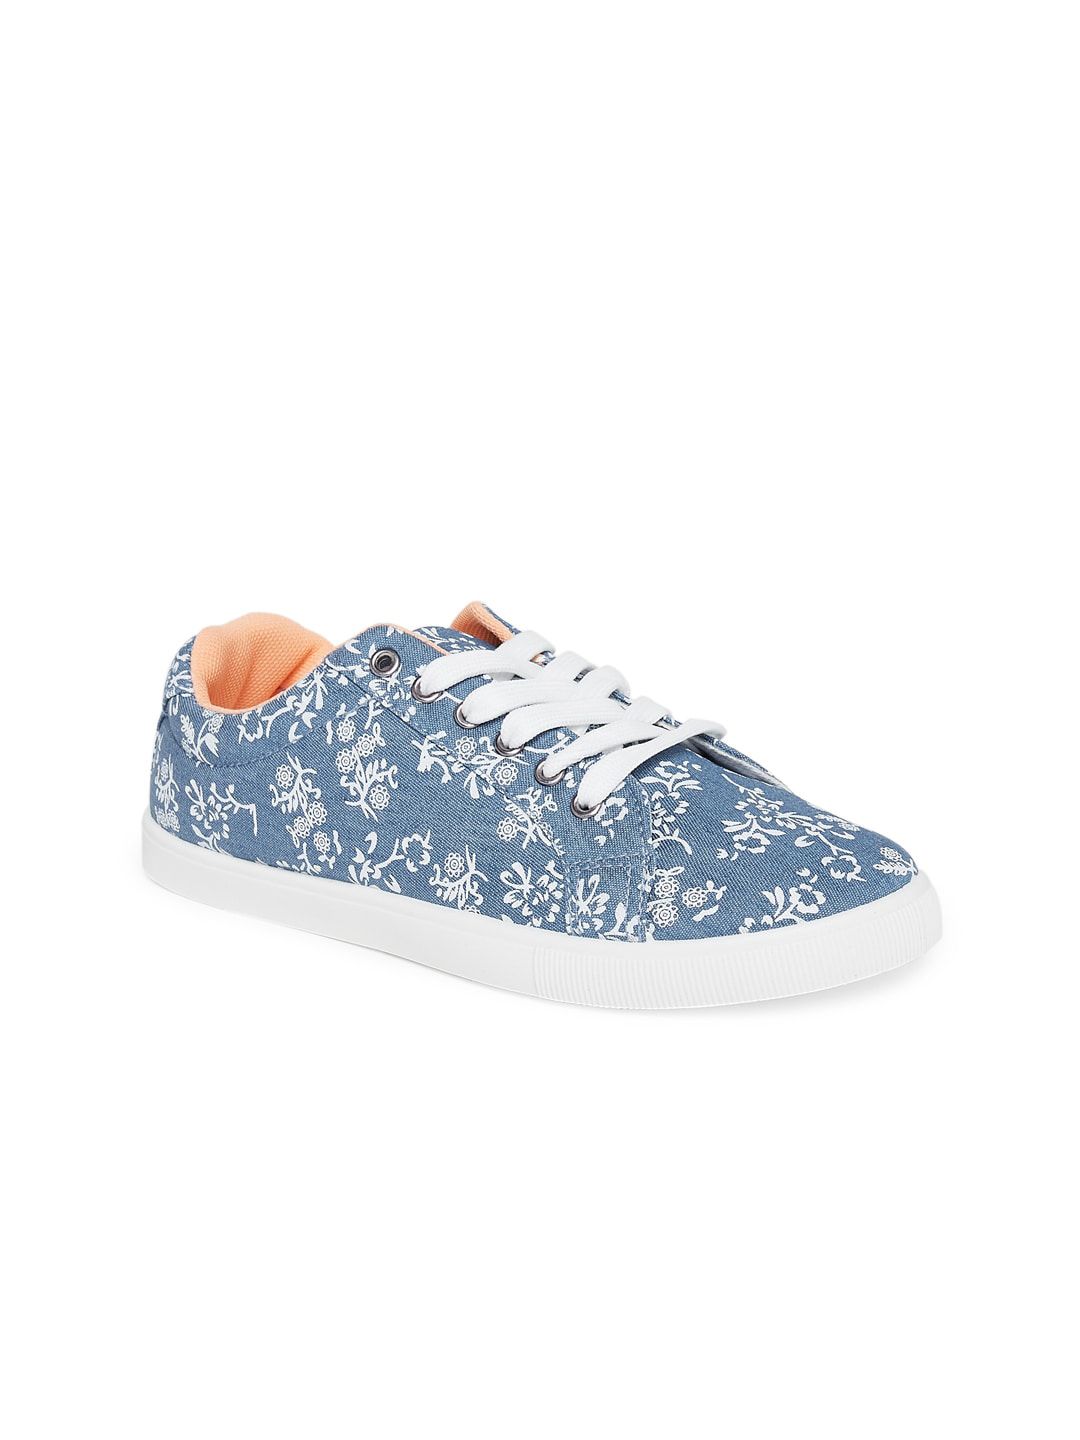 Forever Glam by Pantaloons Women Blue Printed Sneakers Price in India